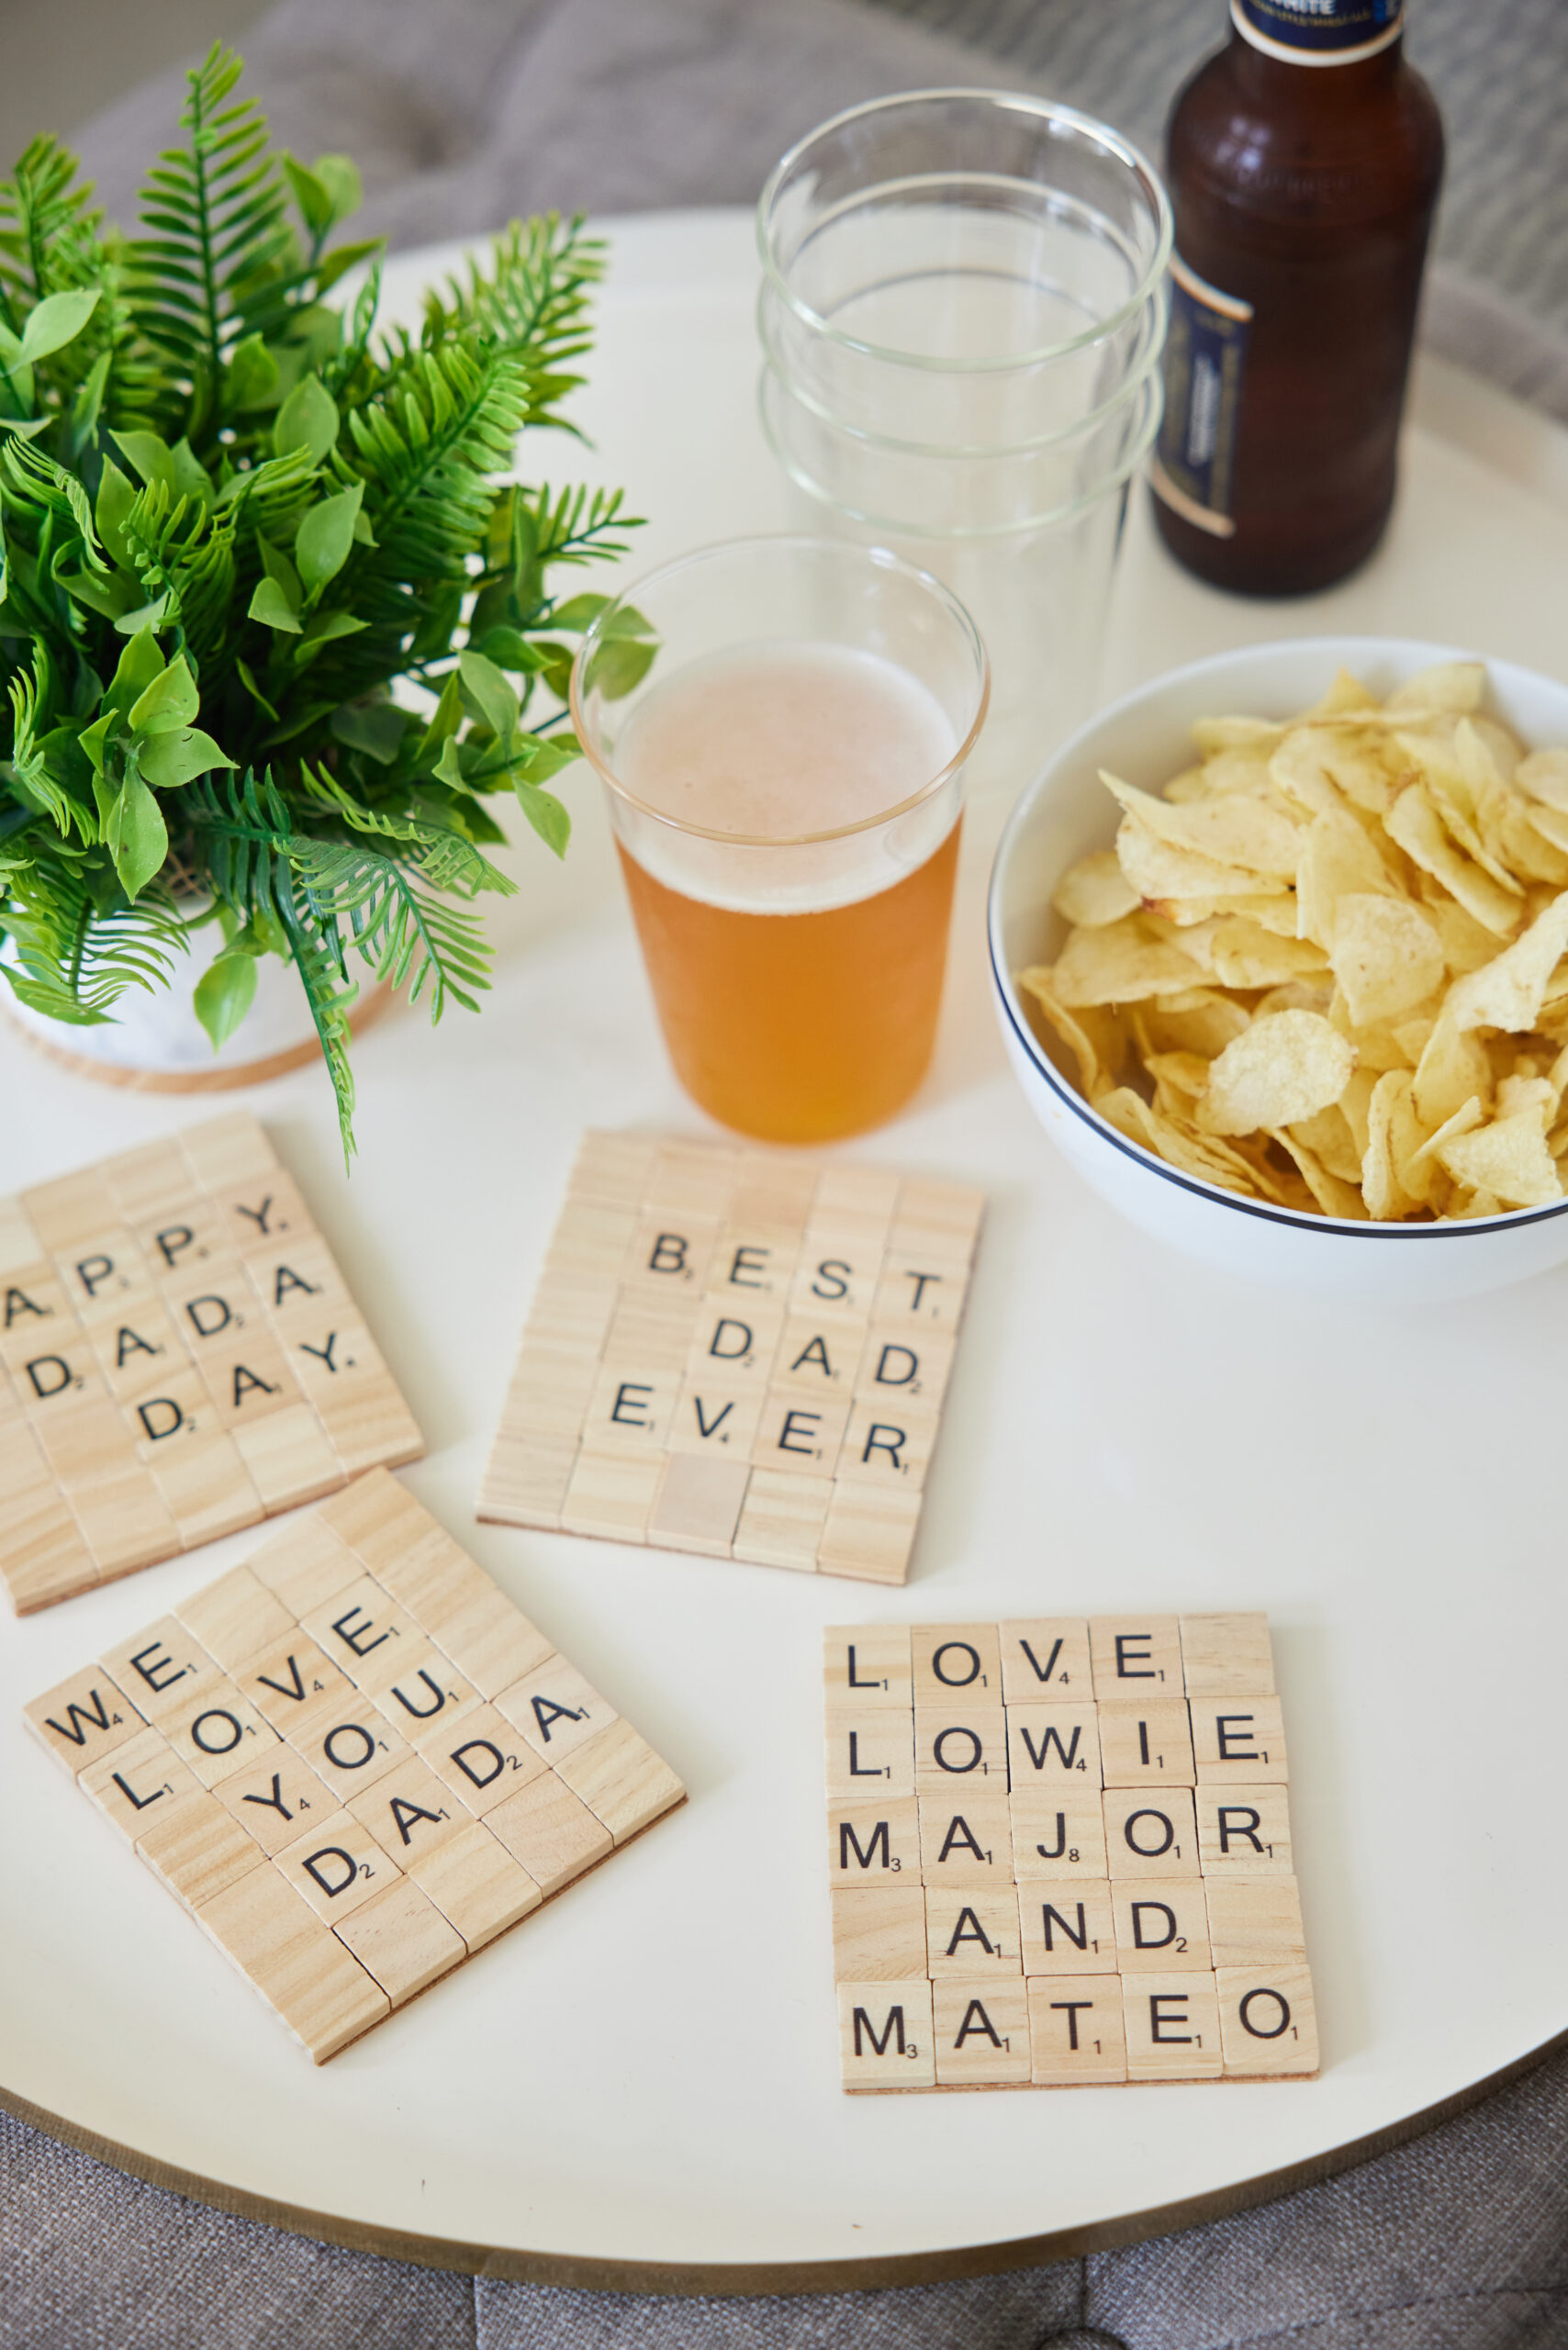 The Best Scrabble Tile Crafts You'll Want to Try - DIY Candy